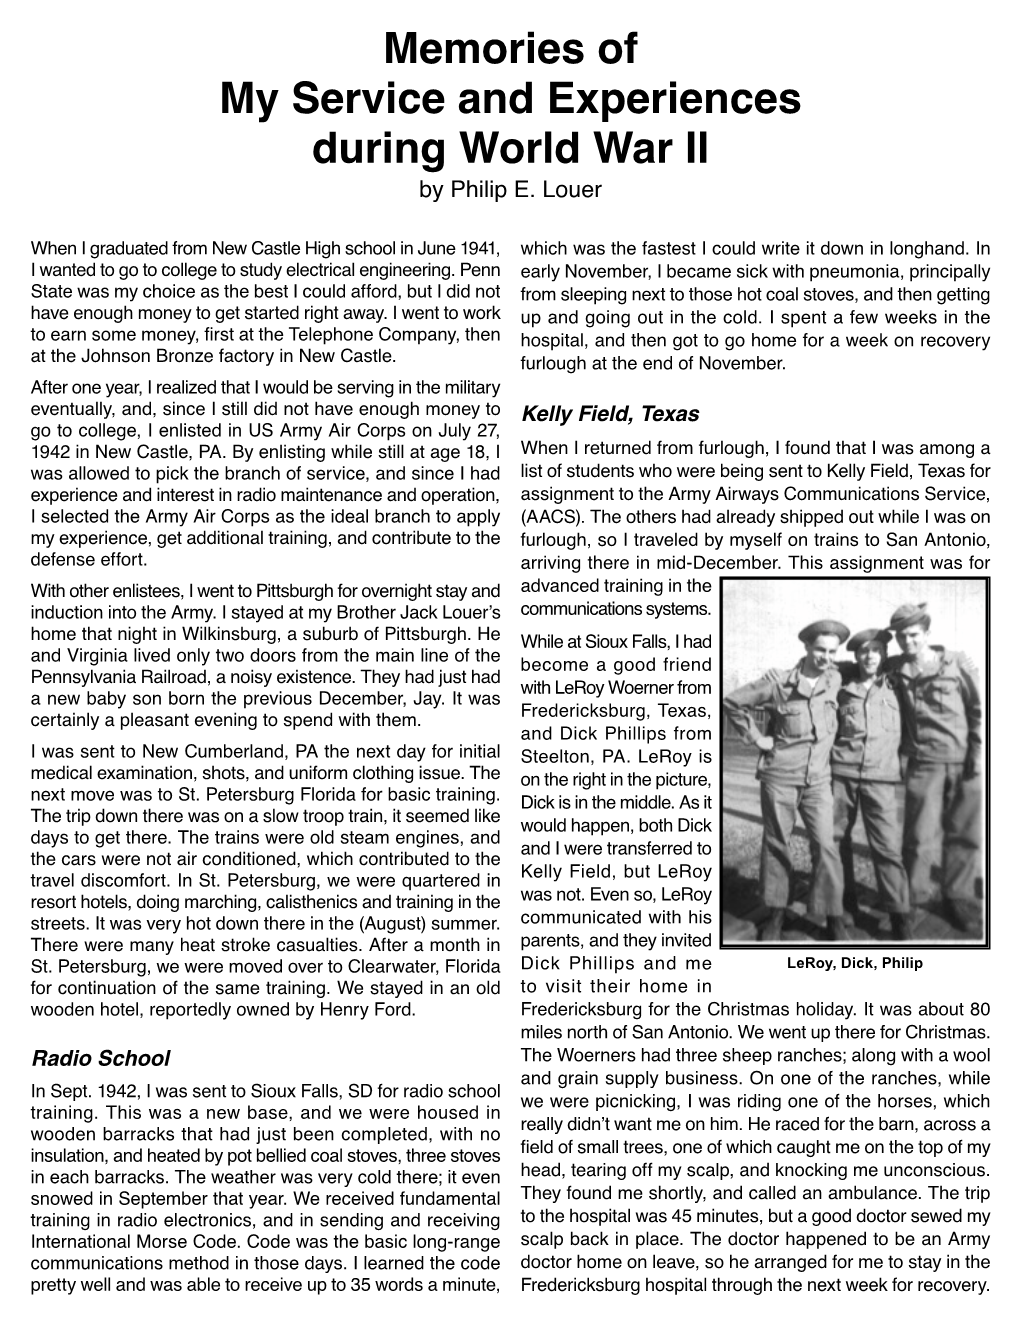 Memories of My Service and Experiences During World War II by Philip E